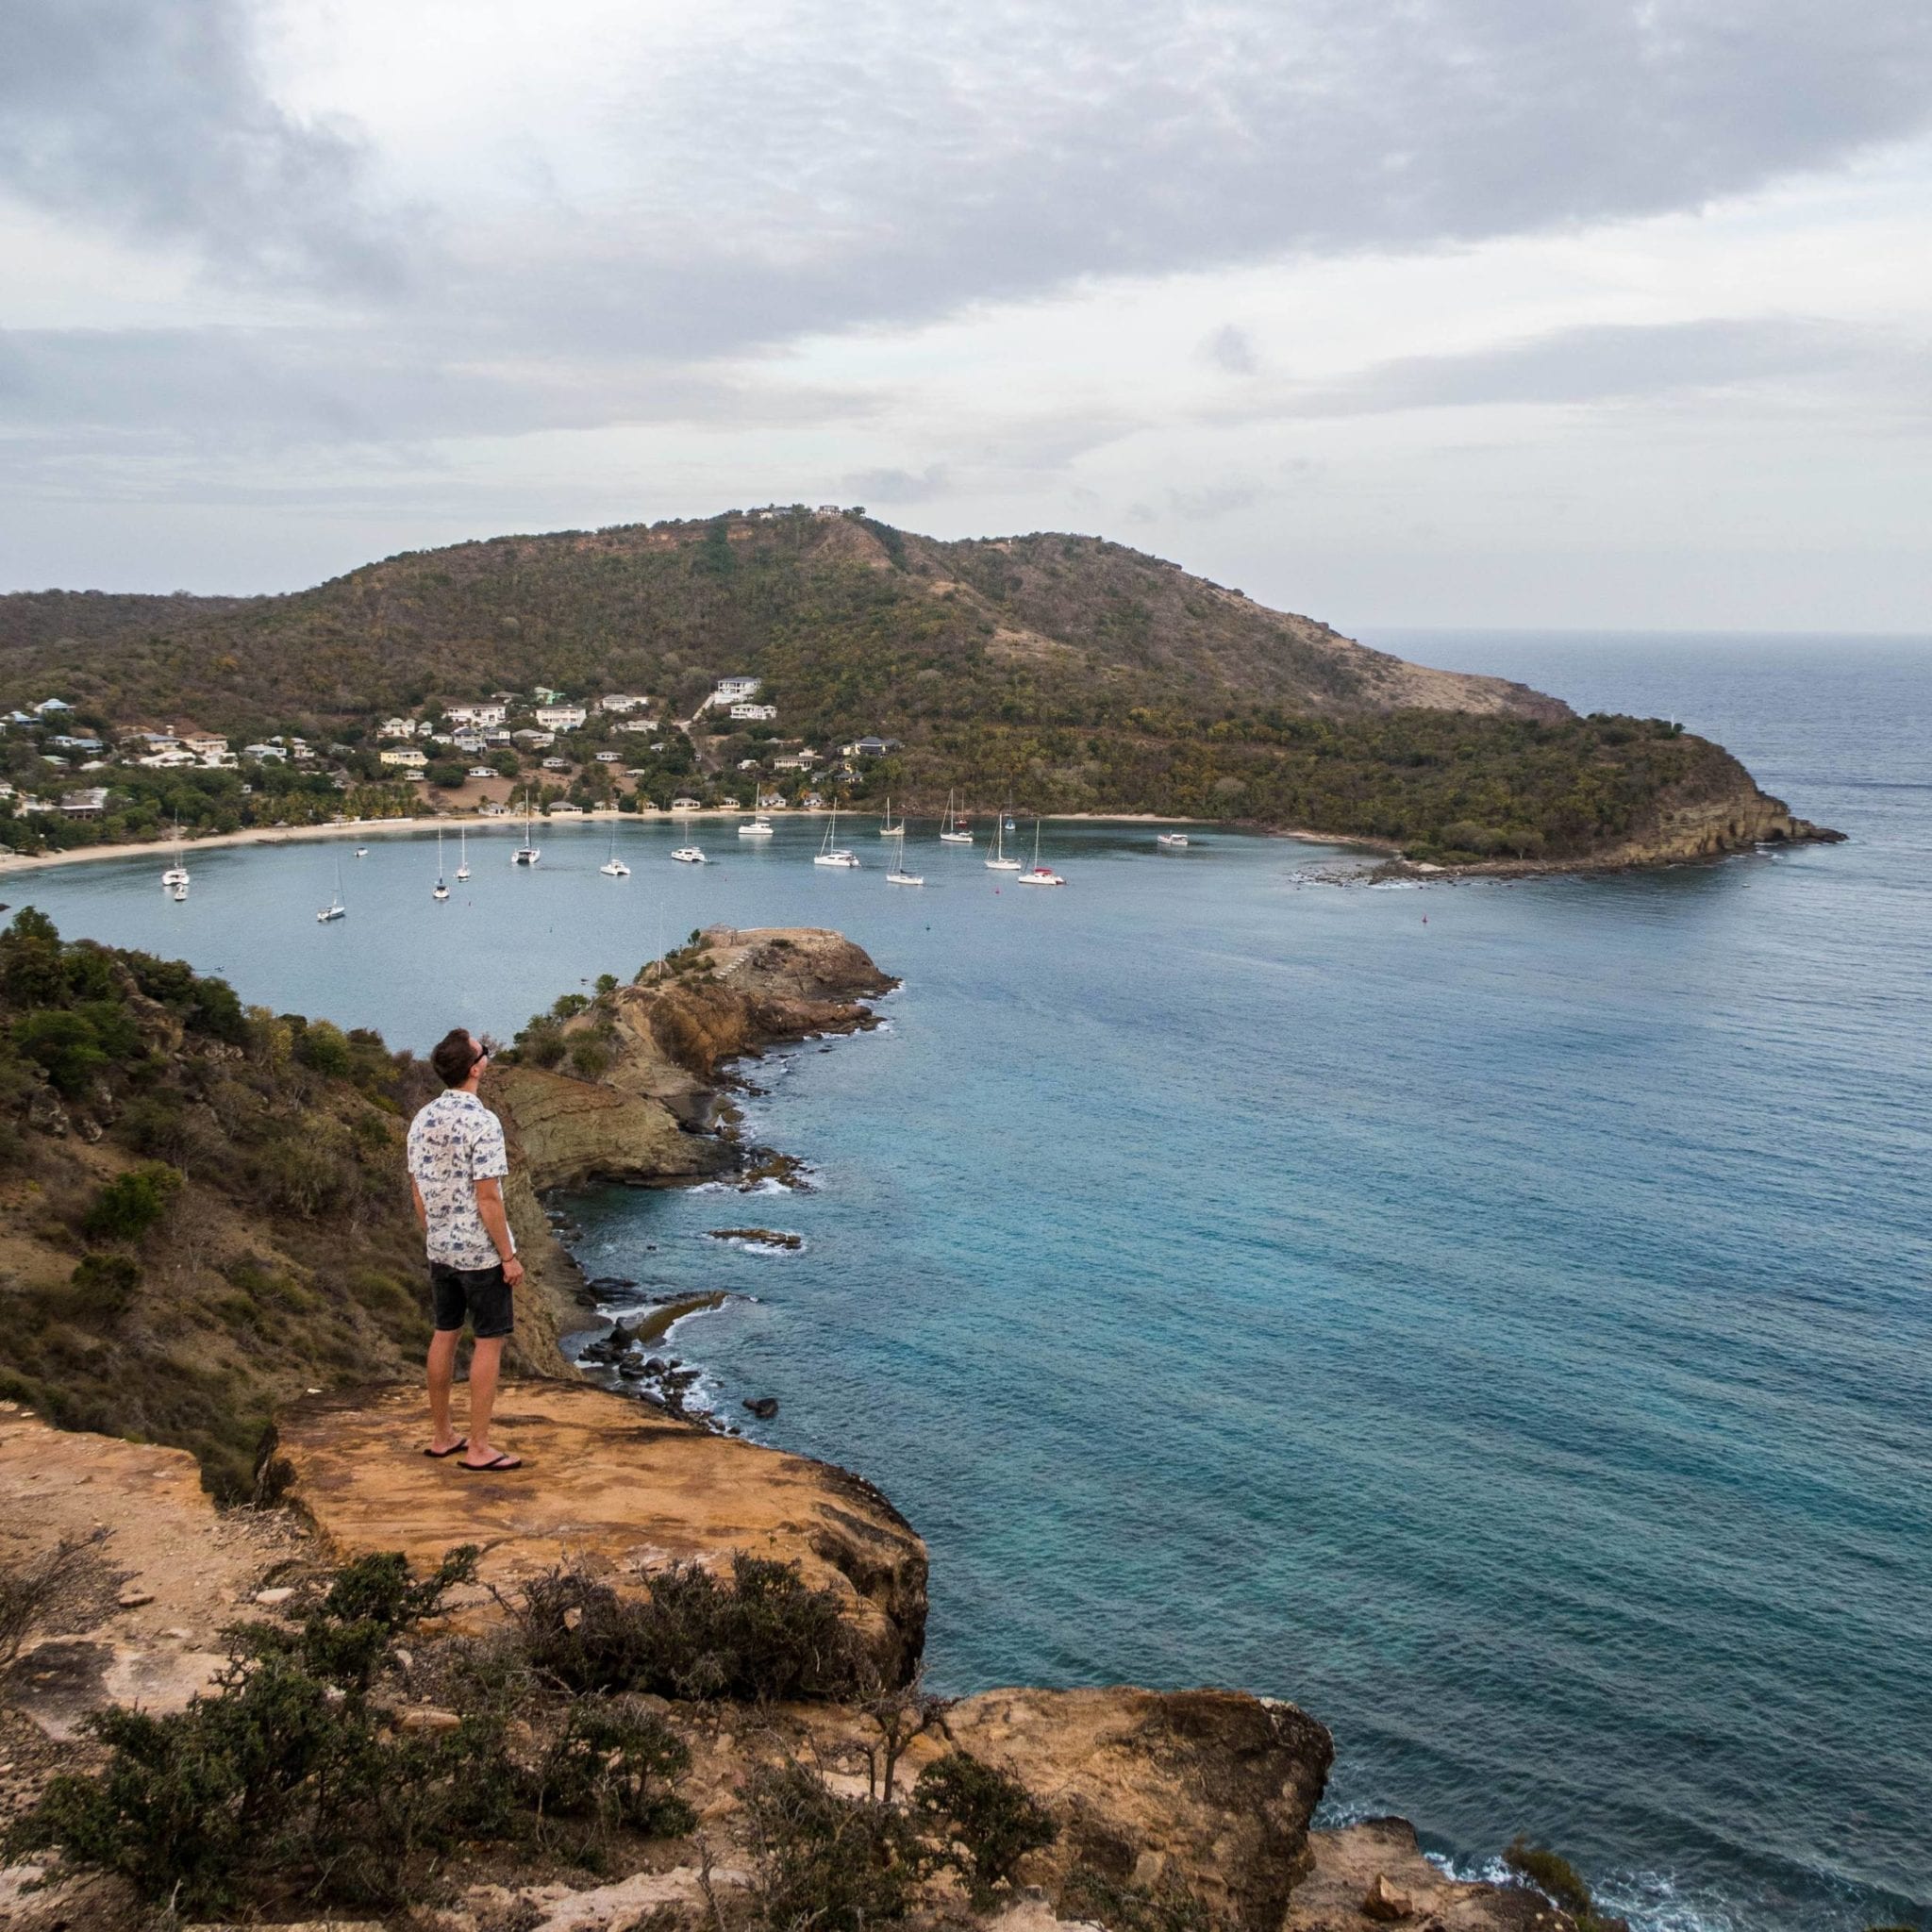 Patrick standing on the edge of a cliff, looking on to the English Harbour in Antigua.